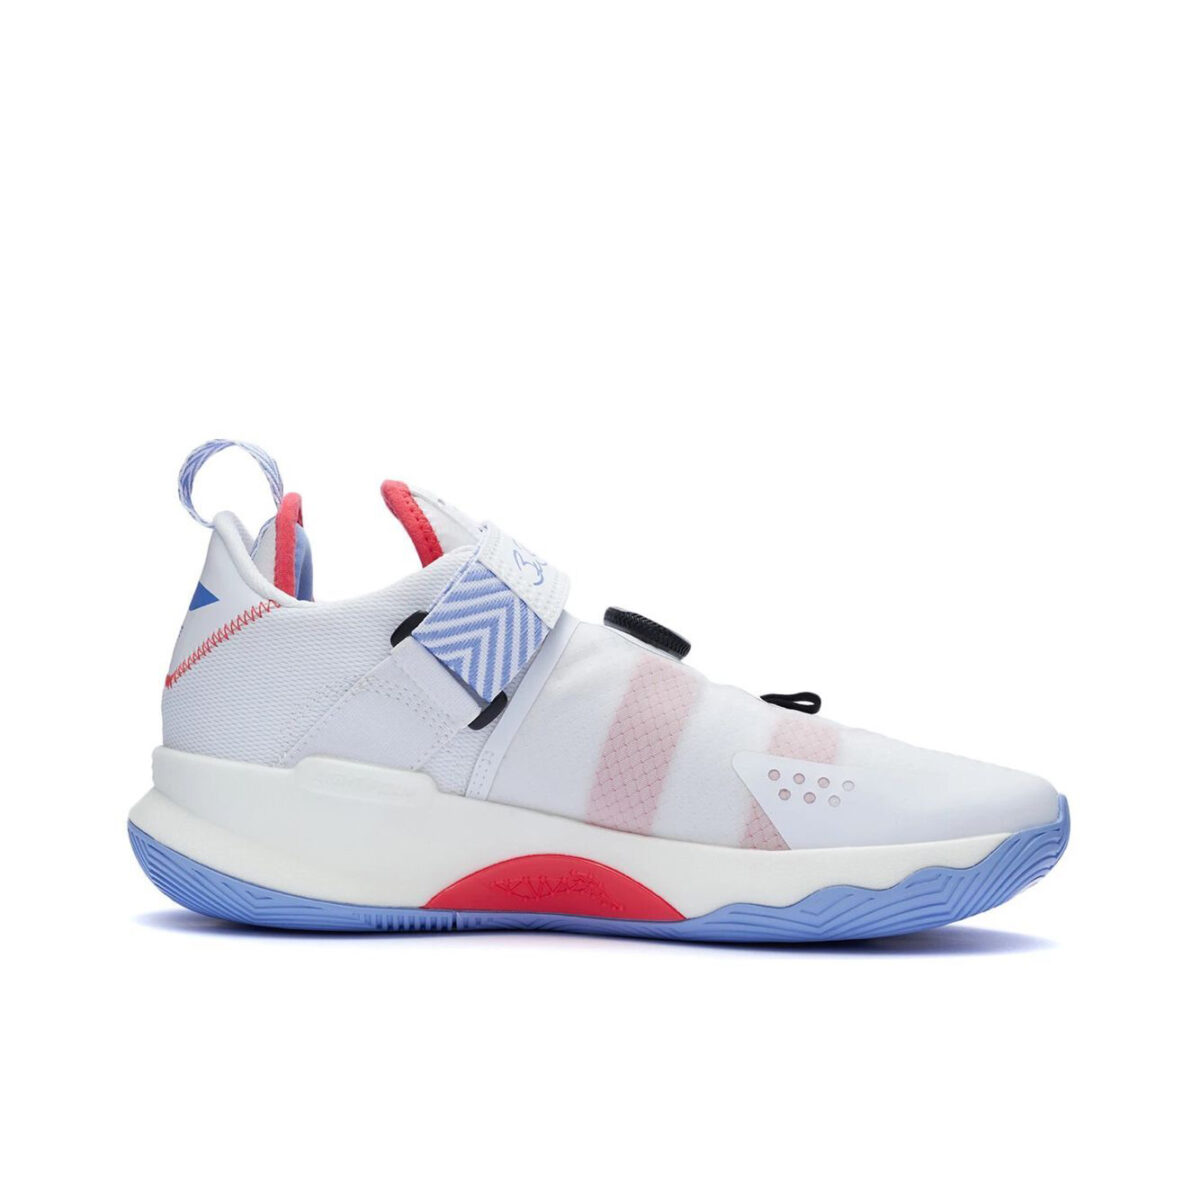 LiNing Way of Wade Fission F7 V2 Basketball Shoes White/ Pink /Blue ...